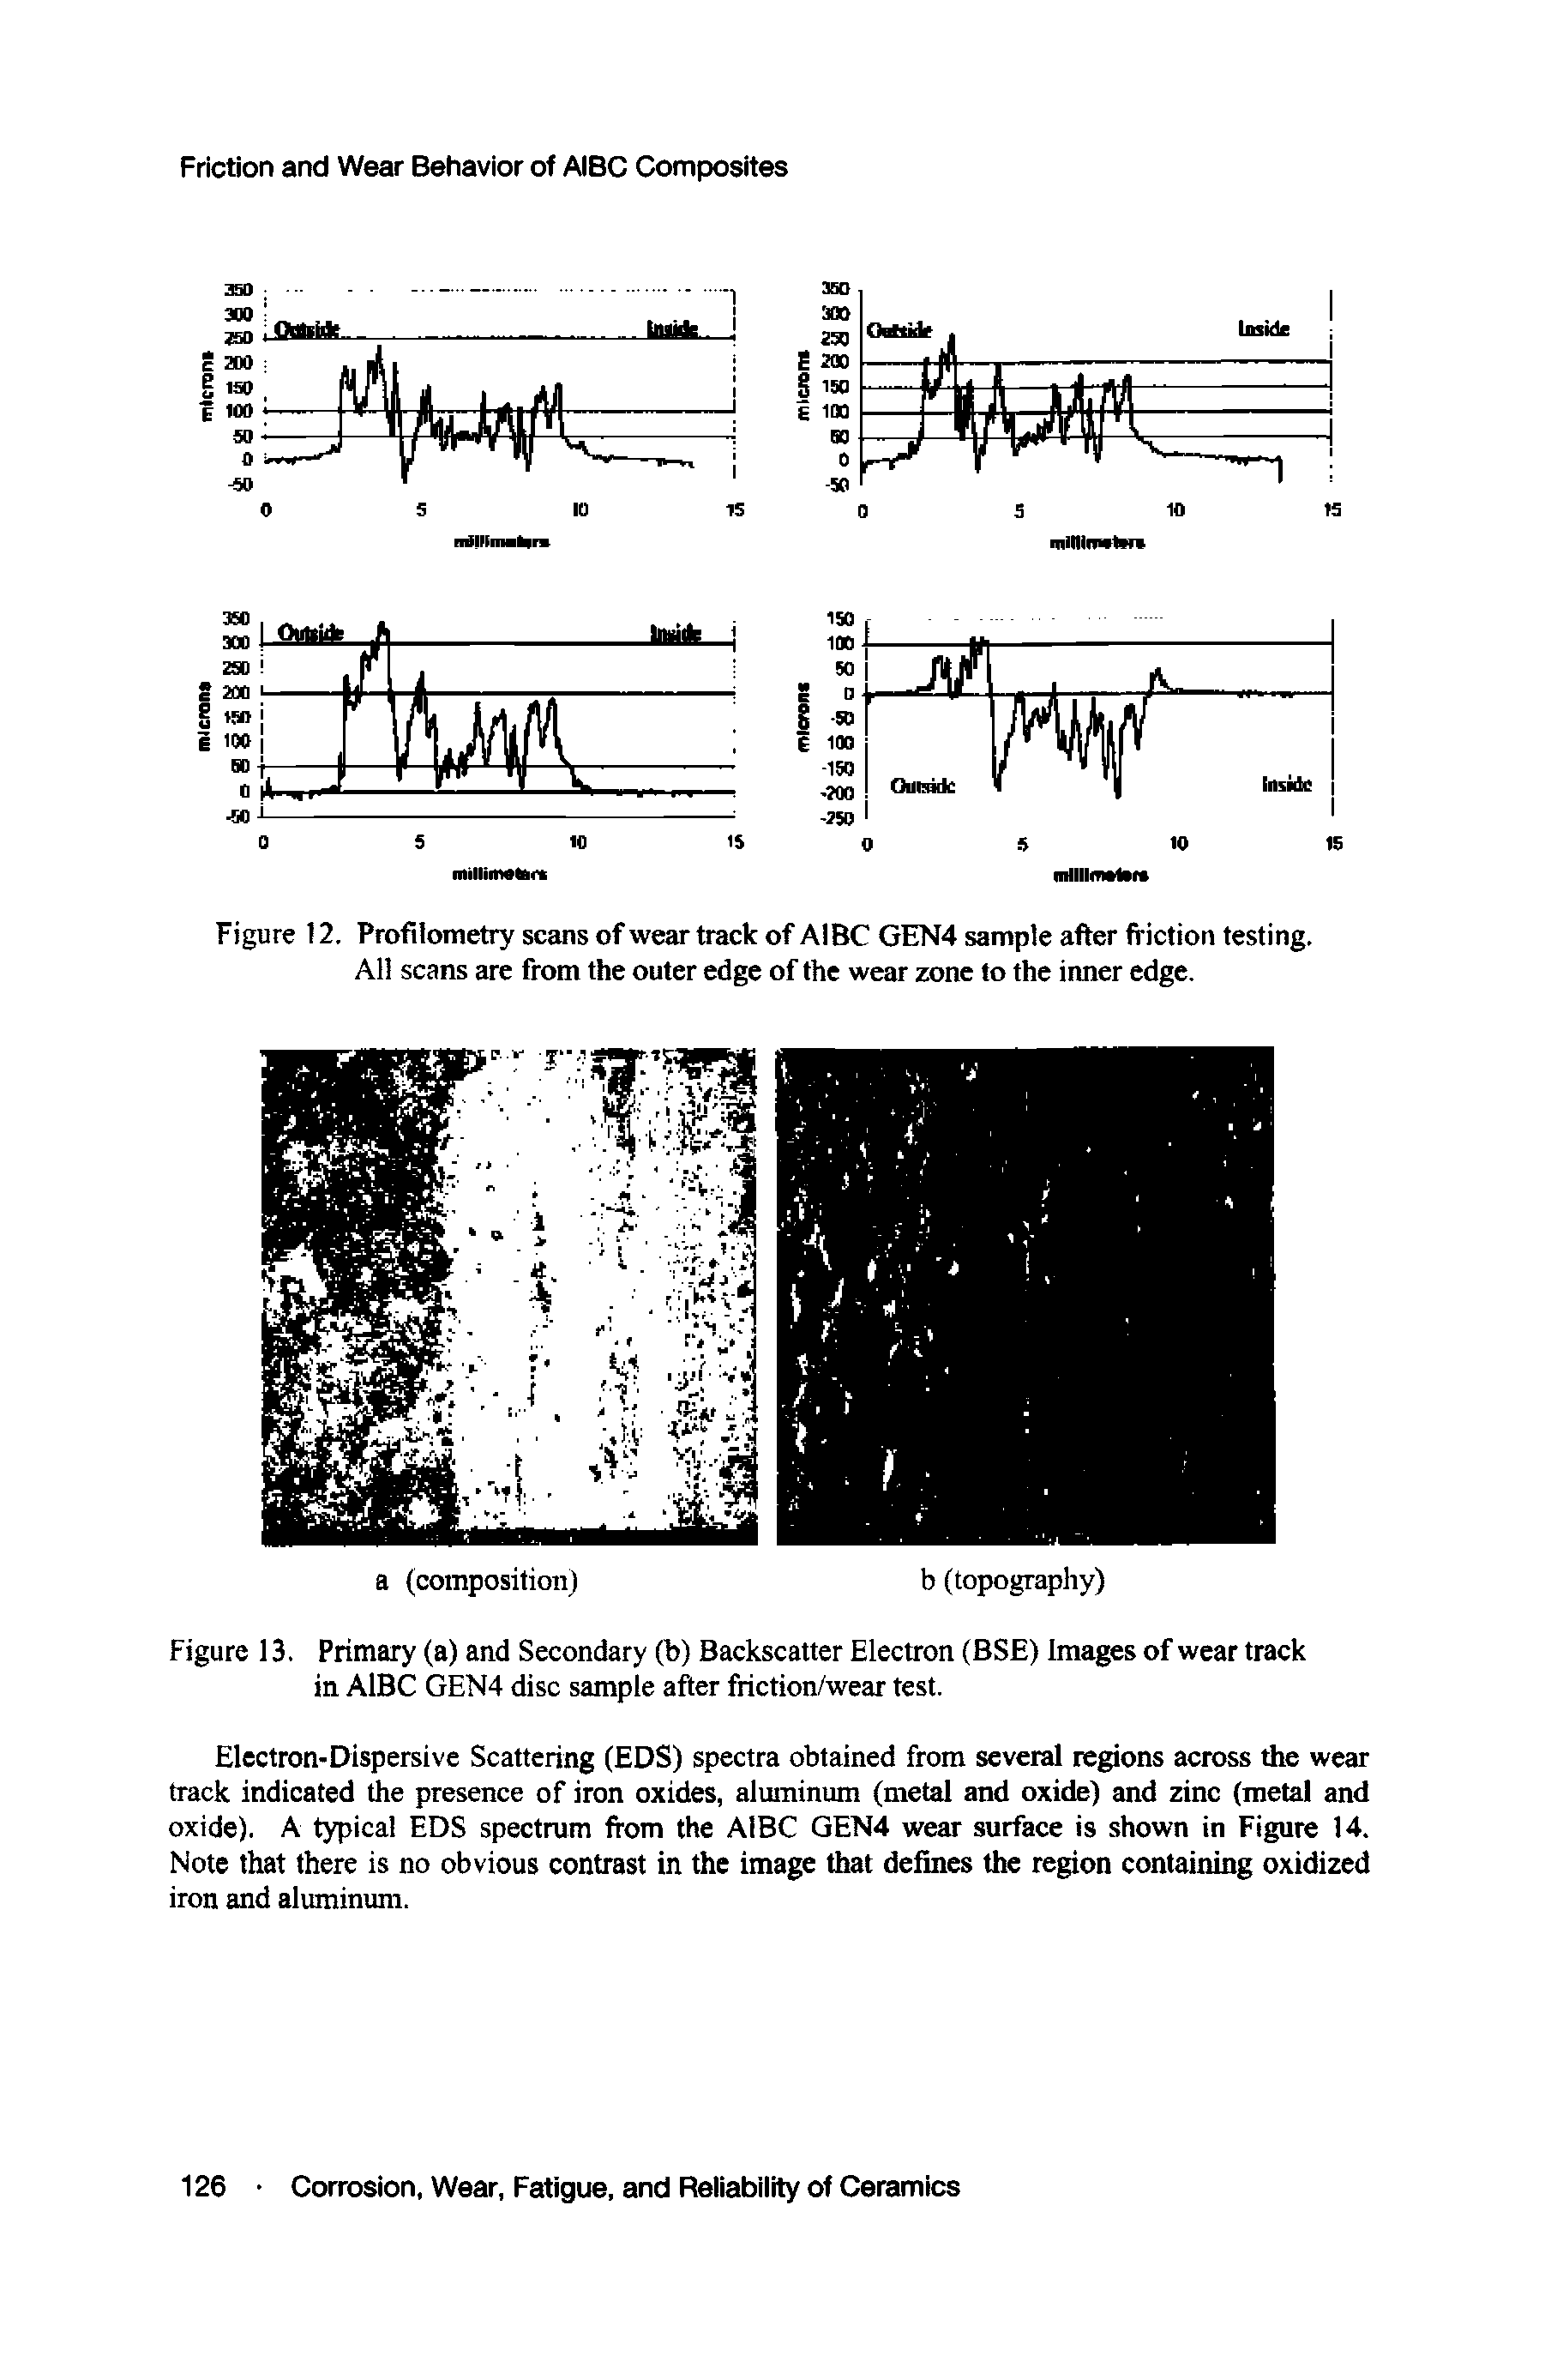 Figure 13. Primary (a) and Secondary (b) Backscatter Electron (BSE) Images of wear track in AIBC GEN4 disc sample after friction/wear test.